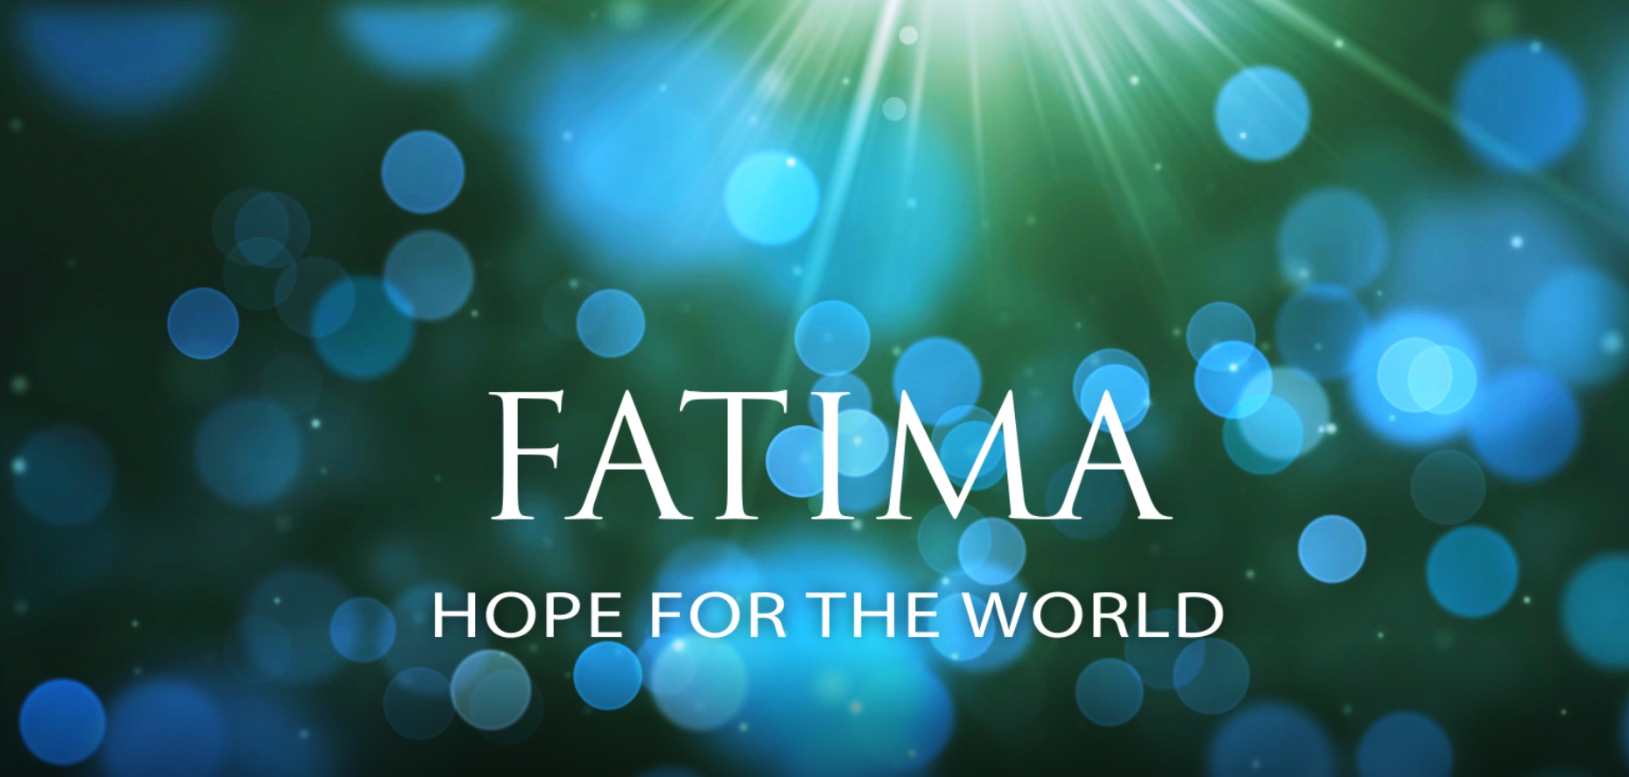 The Angel Apparitions (Fatima: Hope for the World - Episode Three)